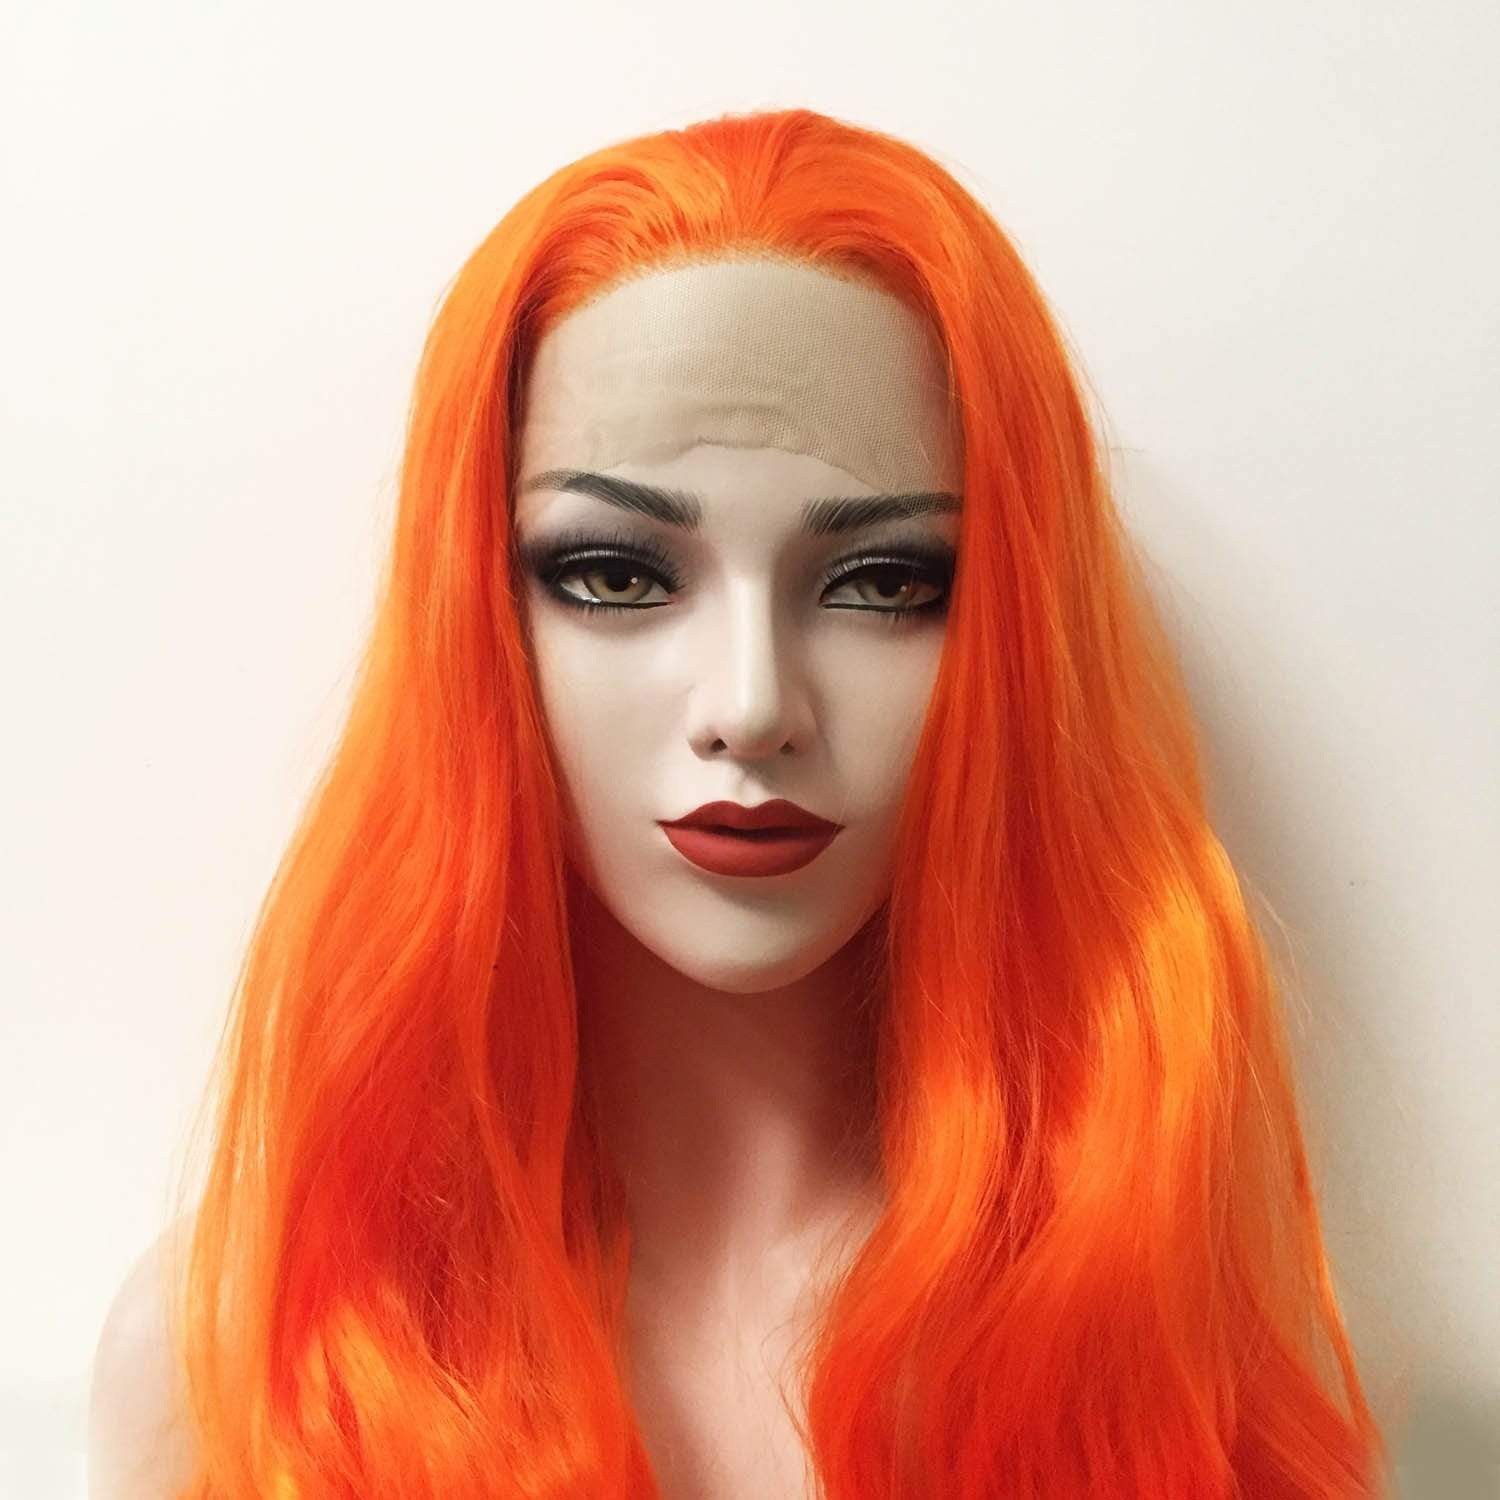 nevermindyrhead Women Lace Front Sharp Orange Free Parting Long Wavy Curly Thick Hair Wig